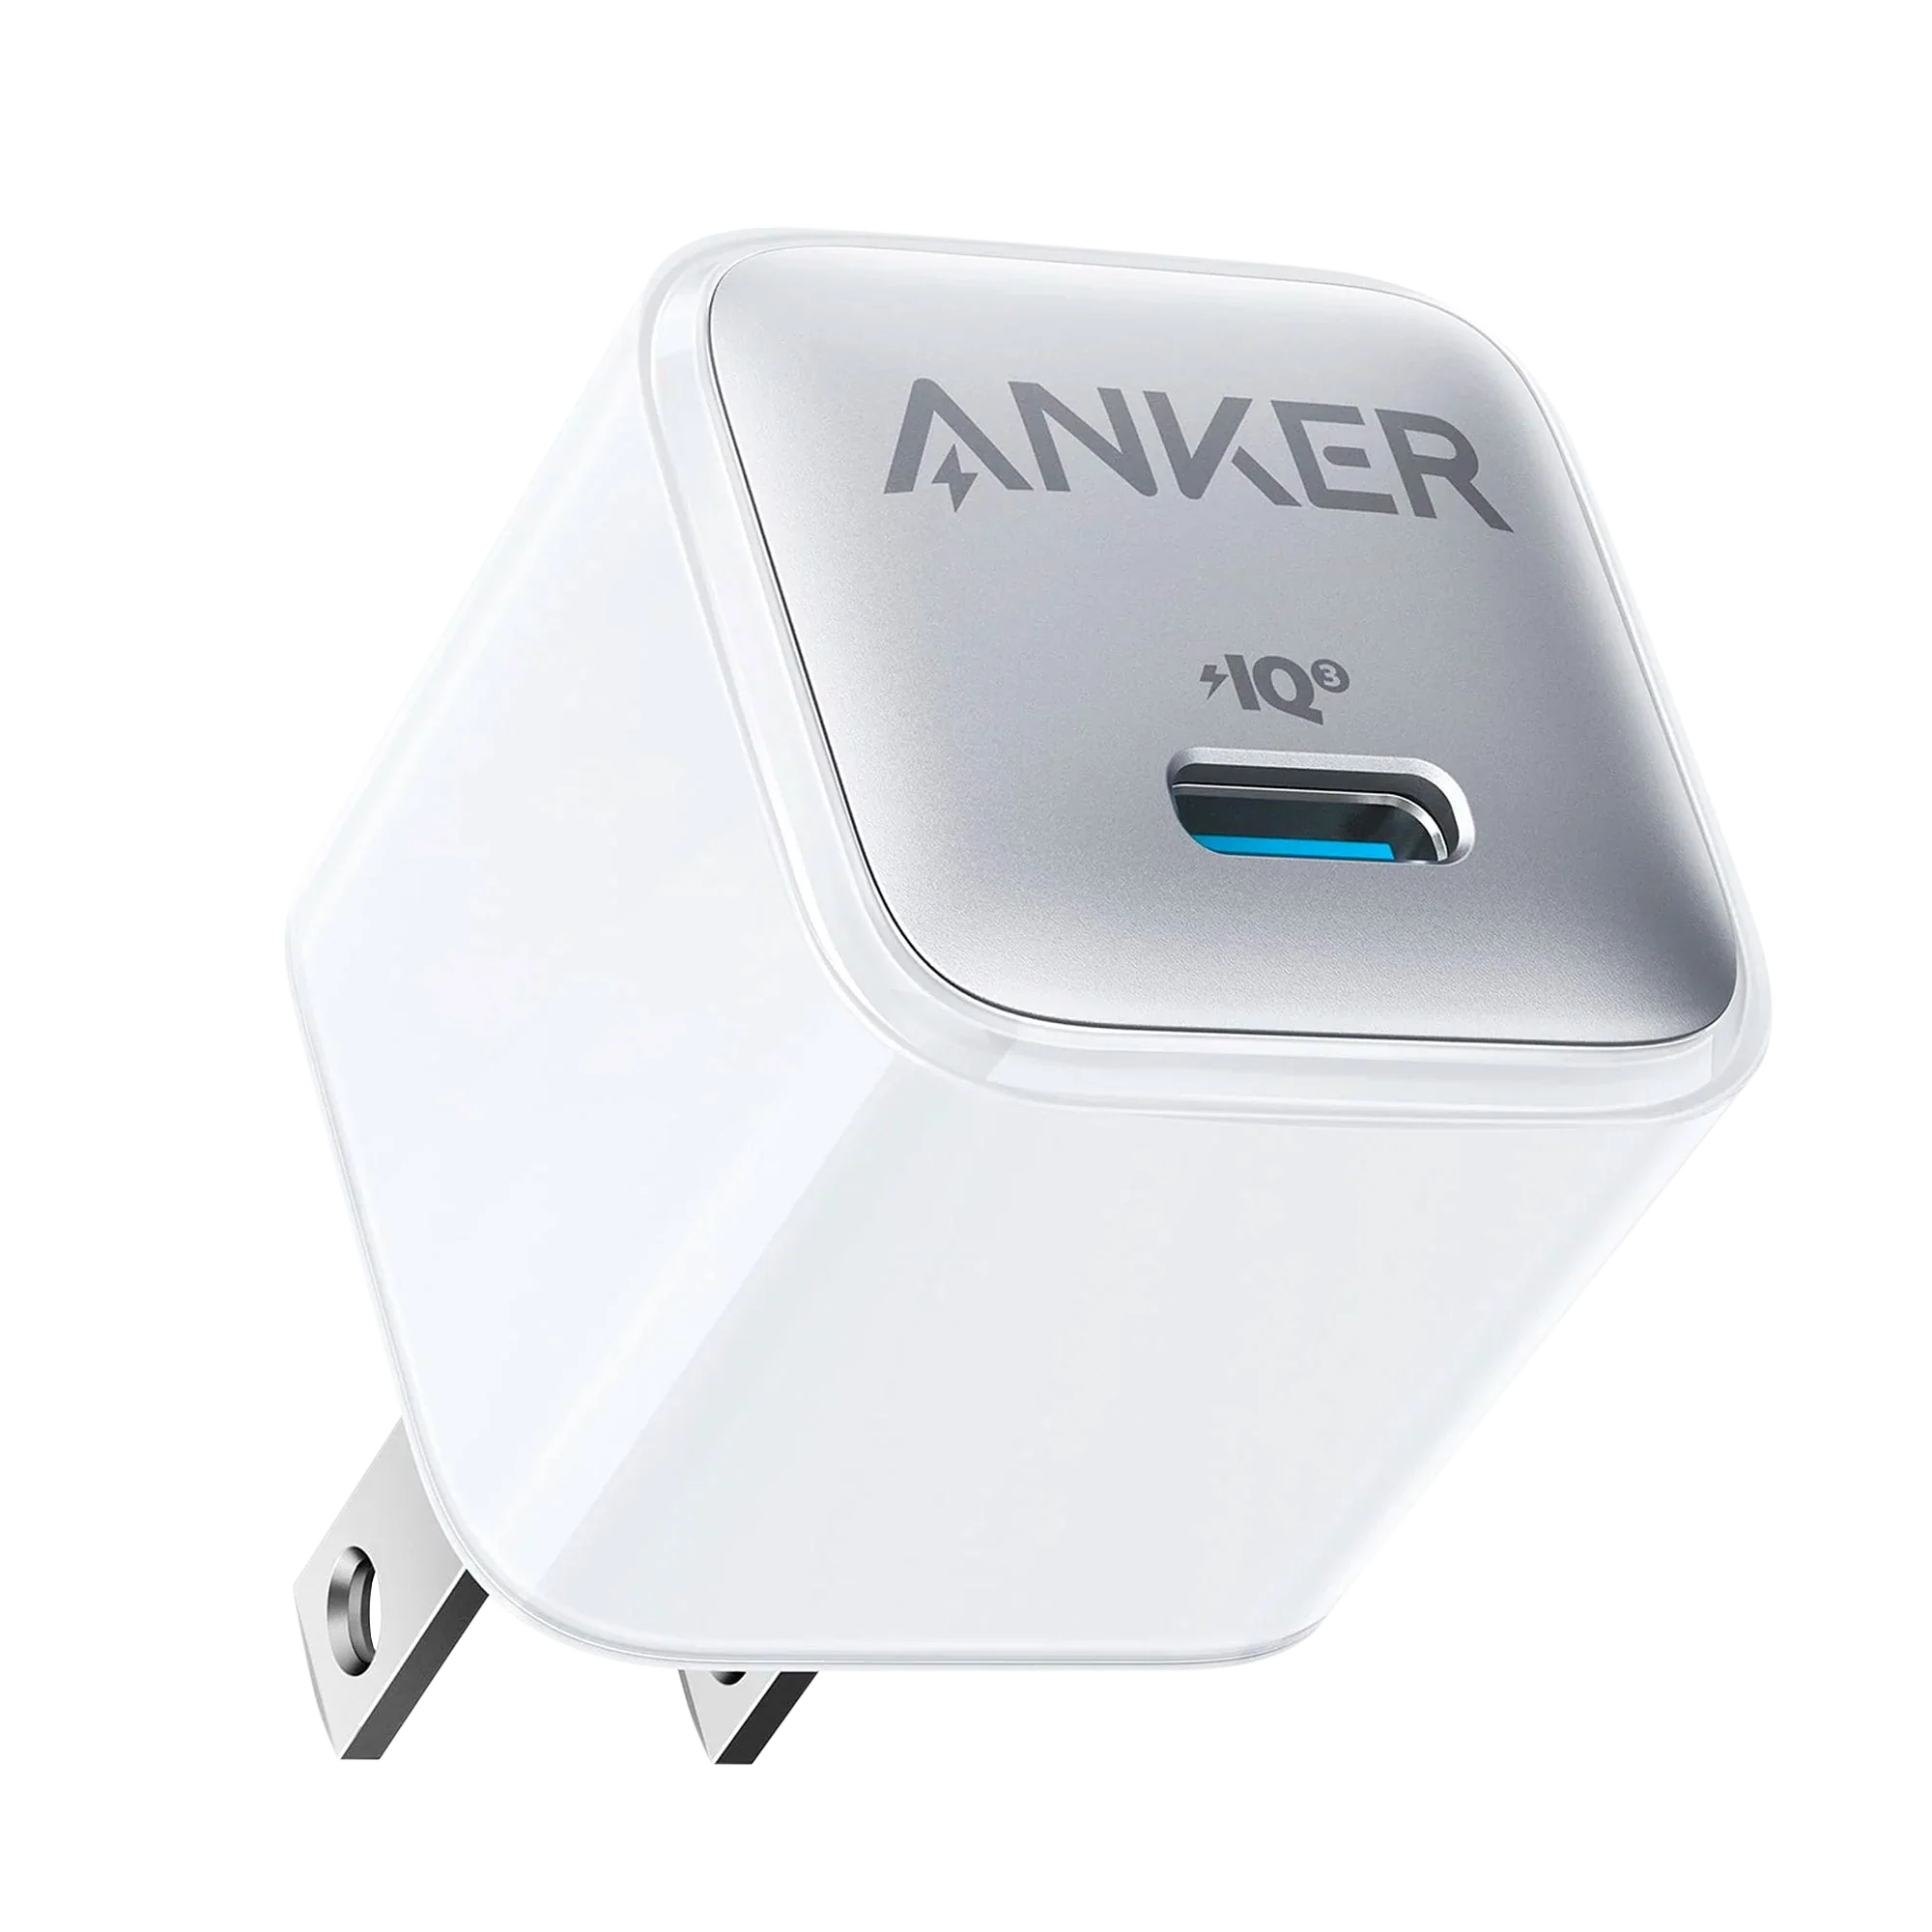 Can I charge this Anker nano power bank with a 67 watt MacBook Pro